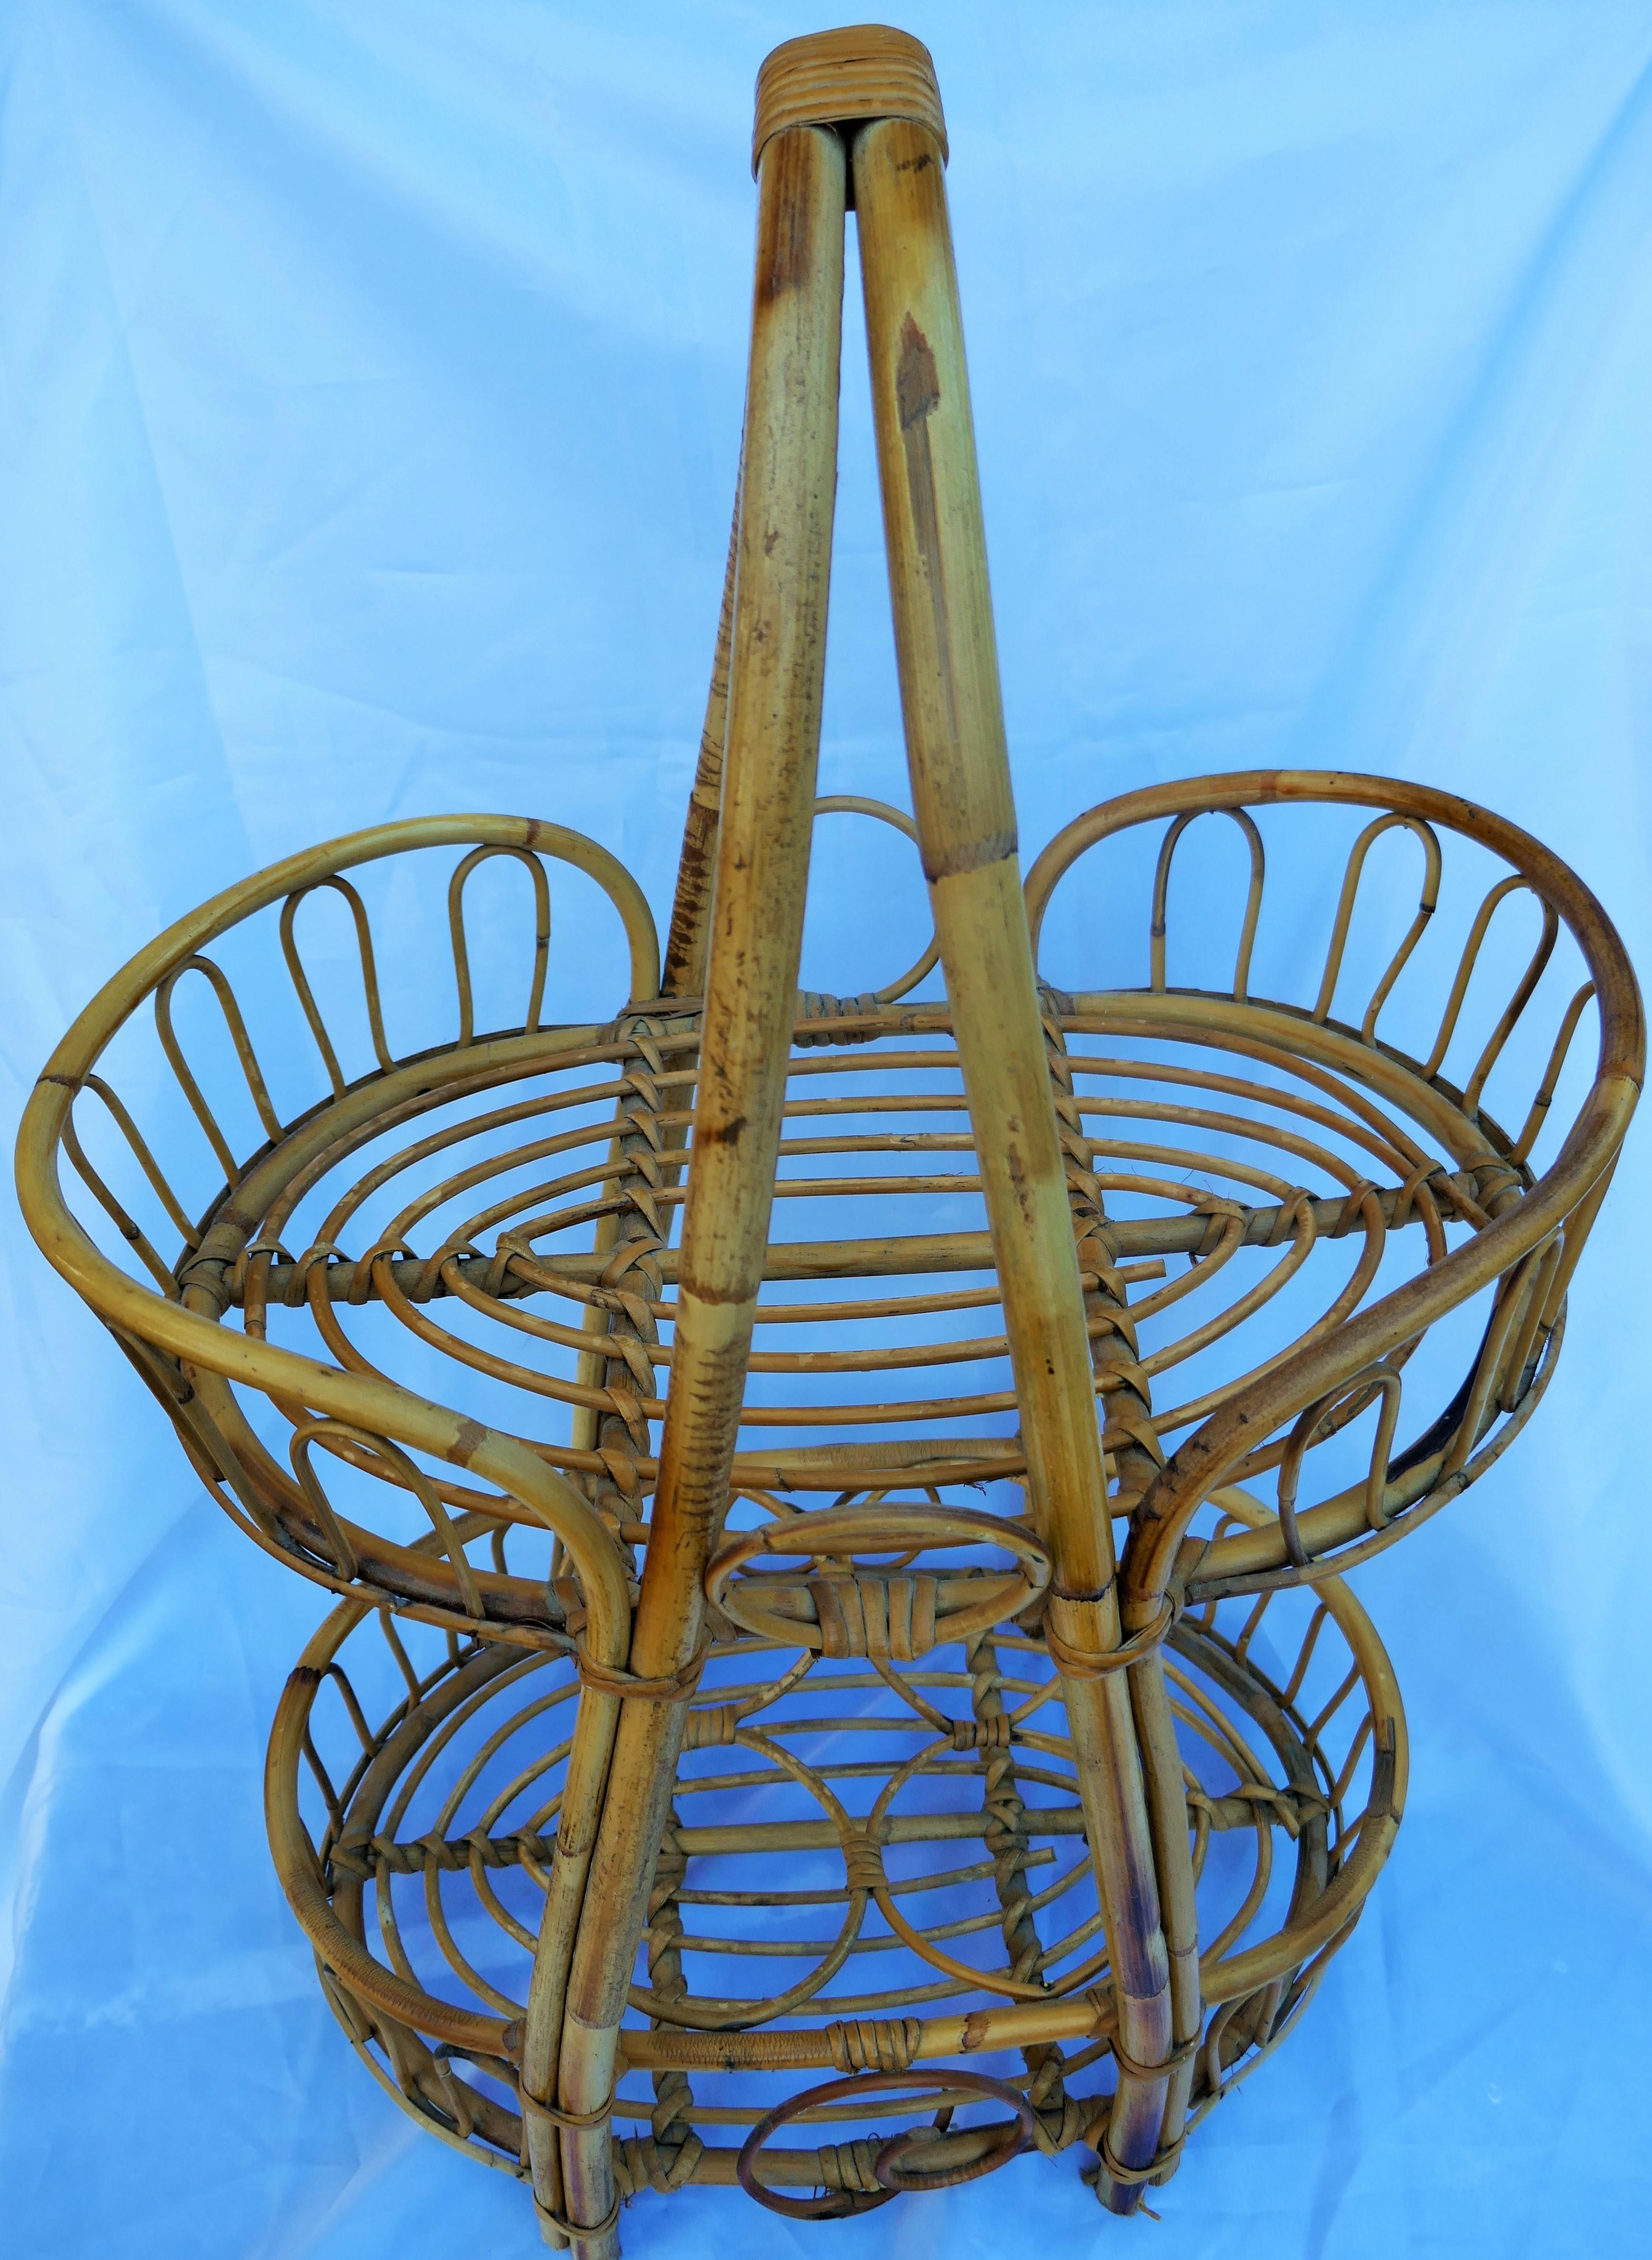 Bamboo Bottle and glass holder attributed to a Dal Vera production For Sale